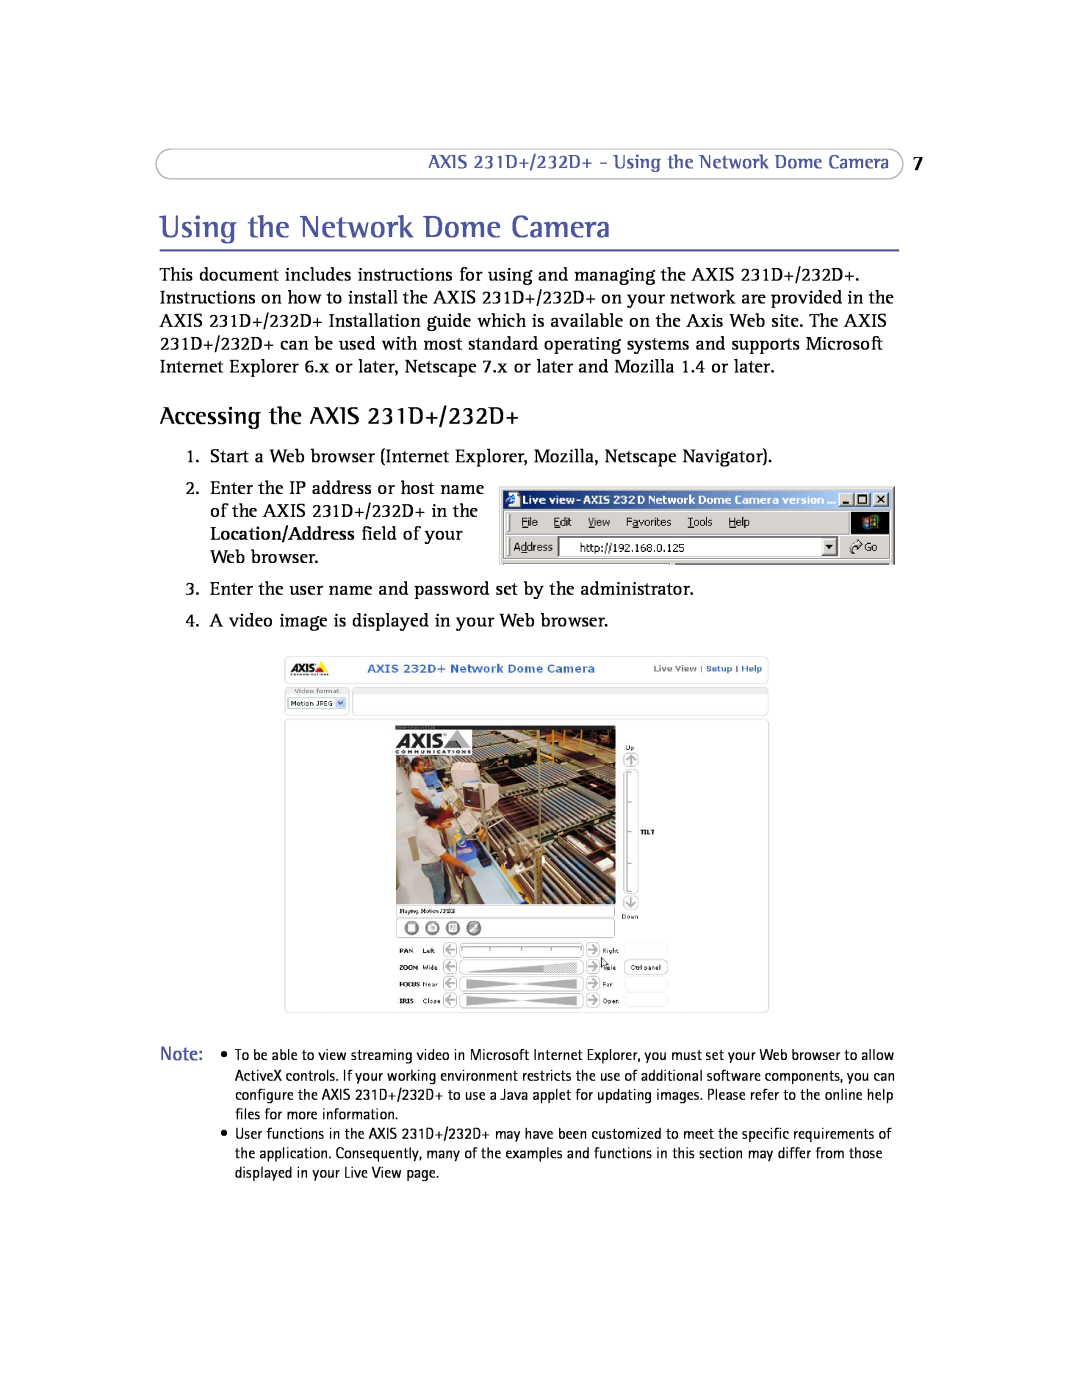 Axis Communications 232d+ user manual Using the Network Dome Camera, Accessing the AXIS 231D+/232D+ 